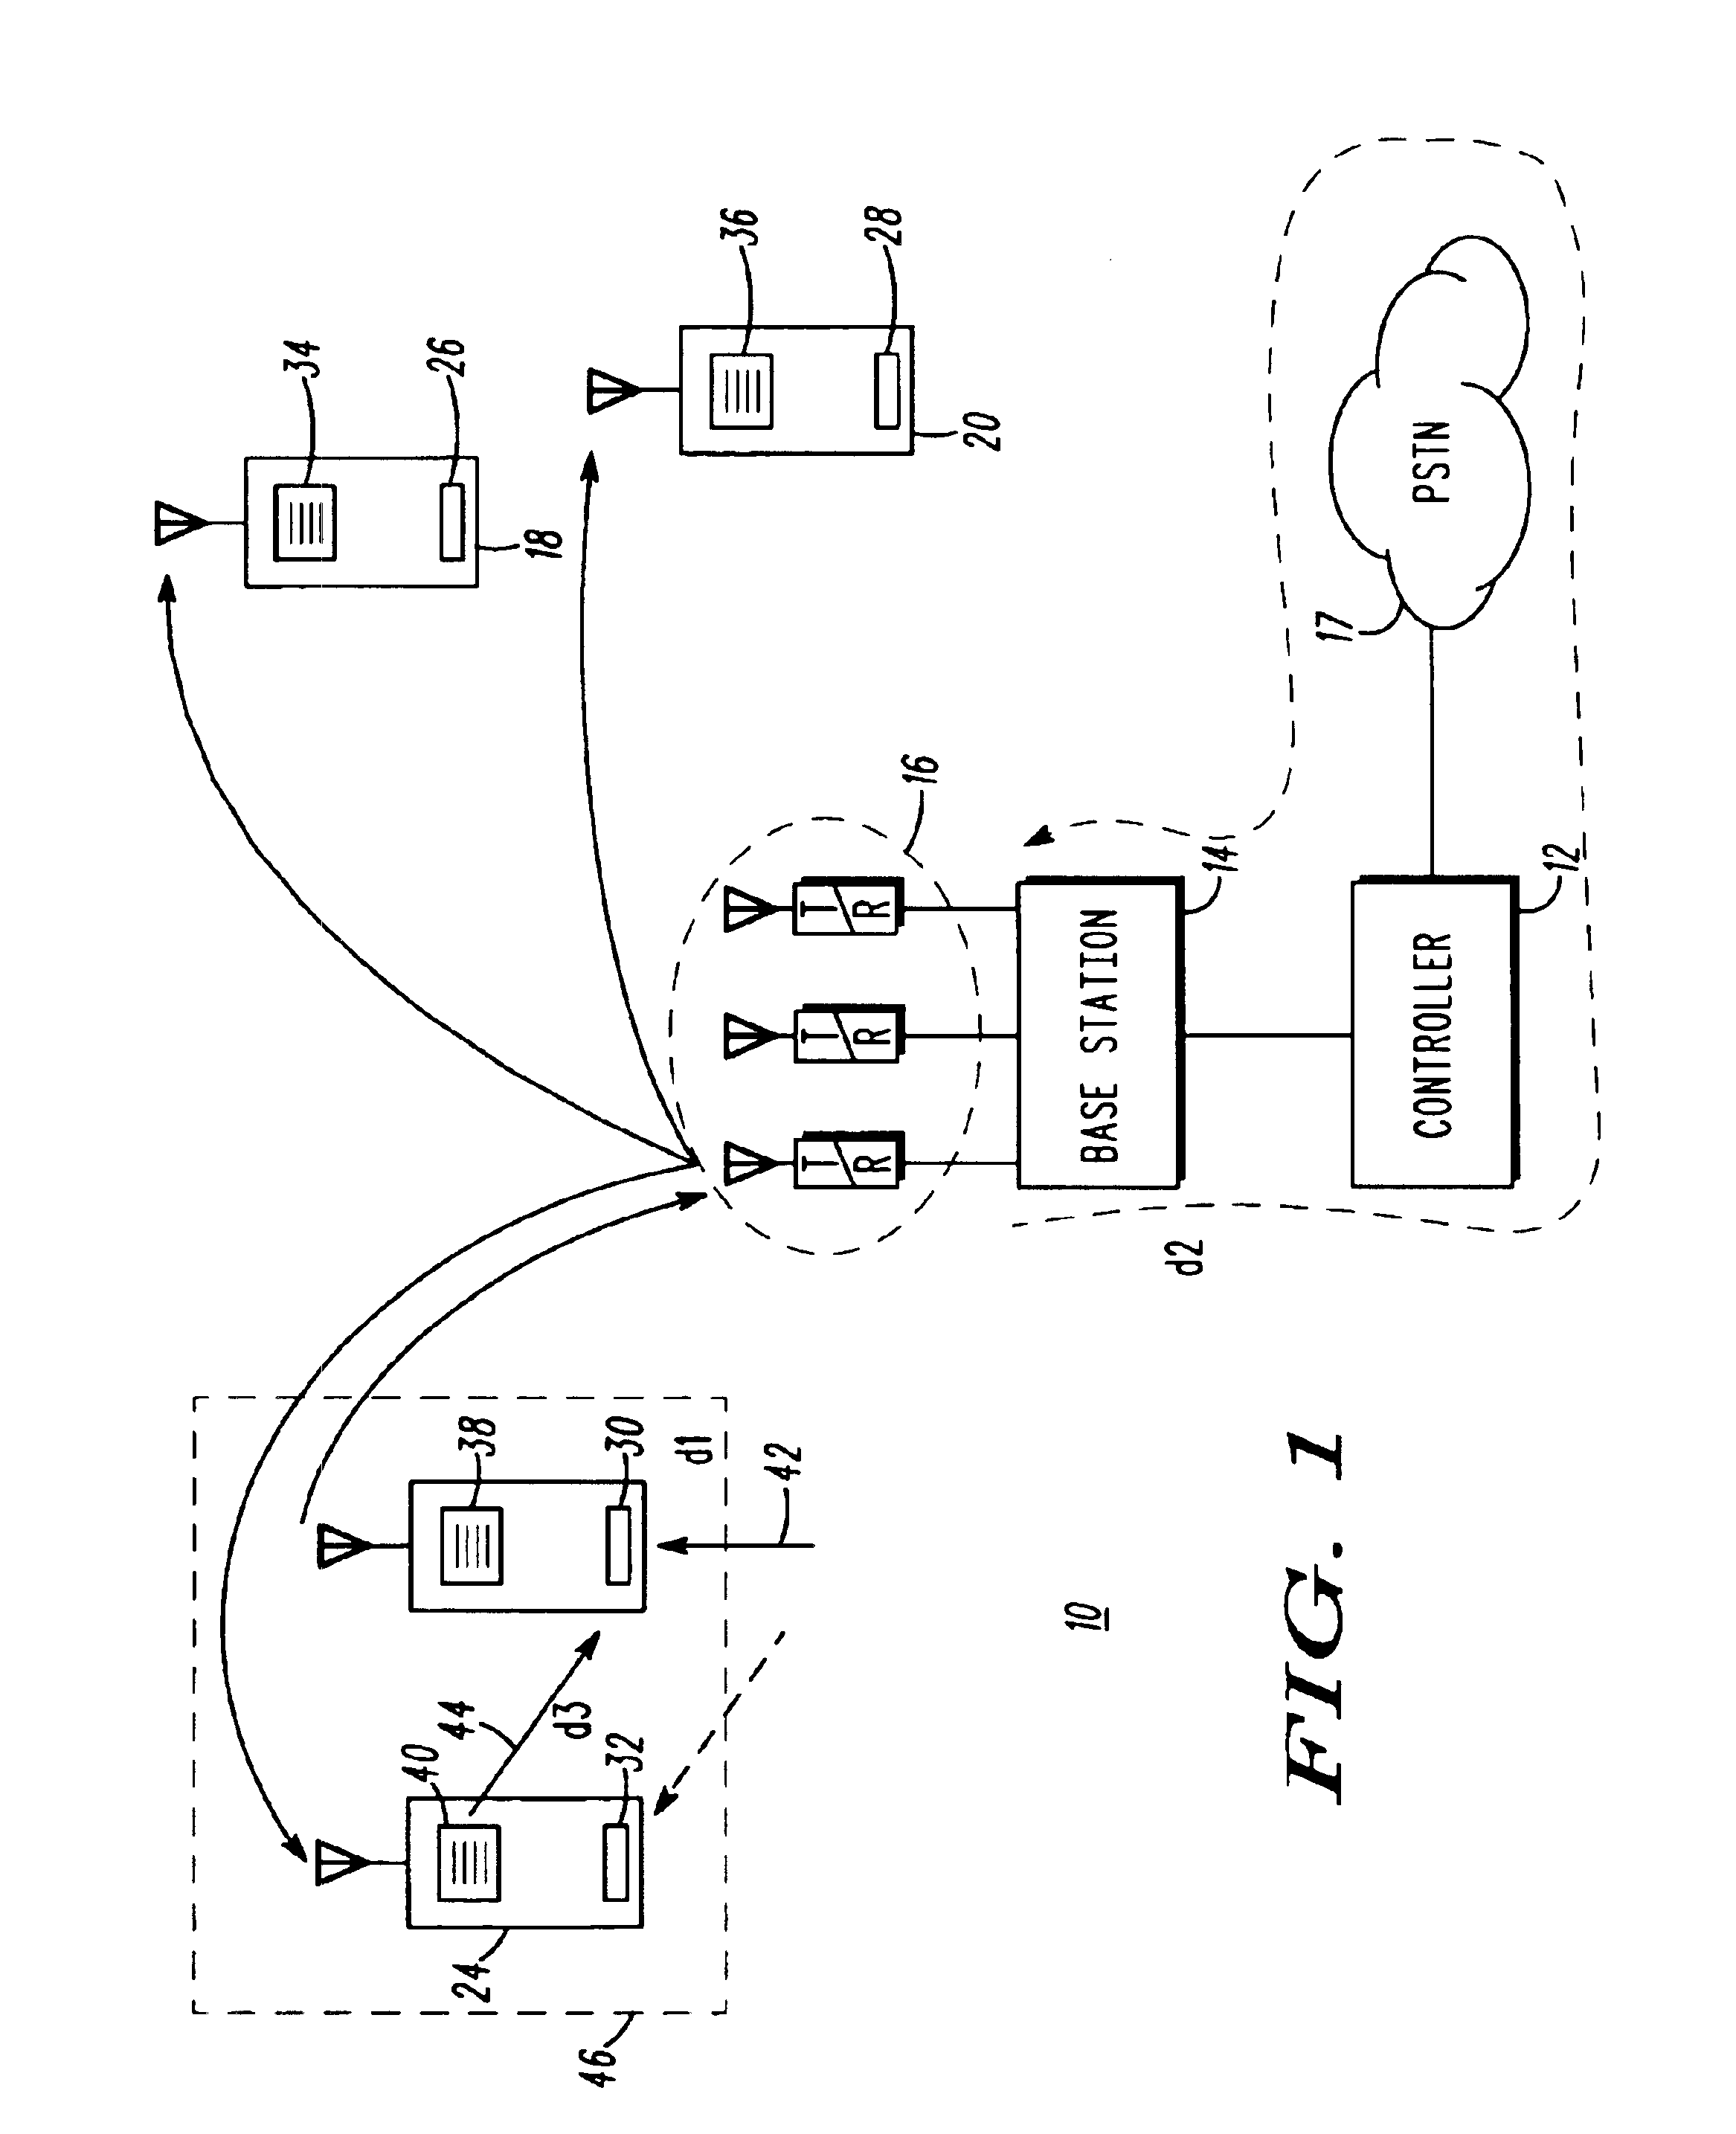 Method and apparatus for reducing echo feedback in a communication system